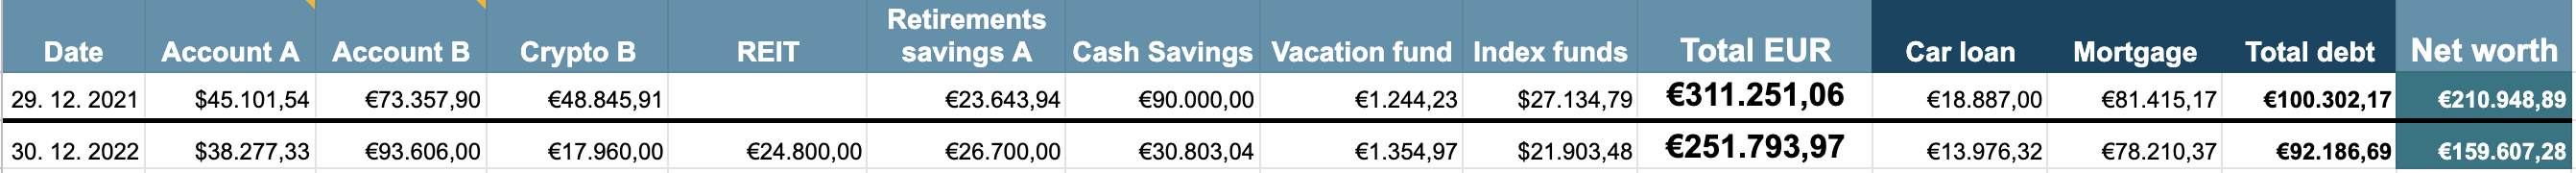 How my Net Worth dropped by €51K in 2022